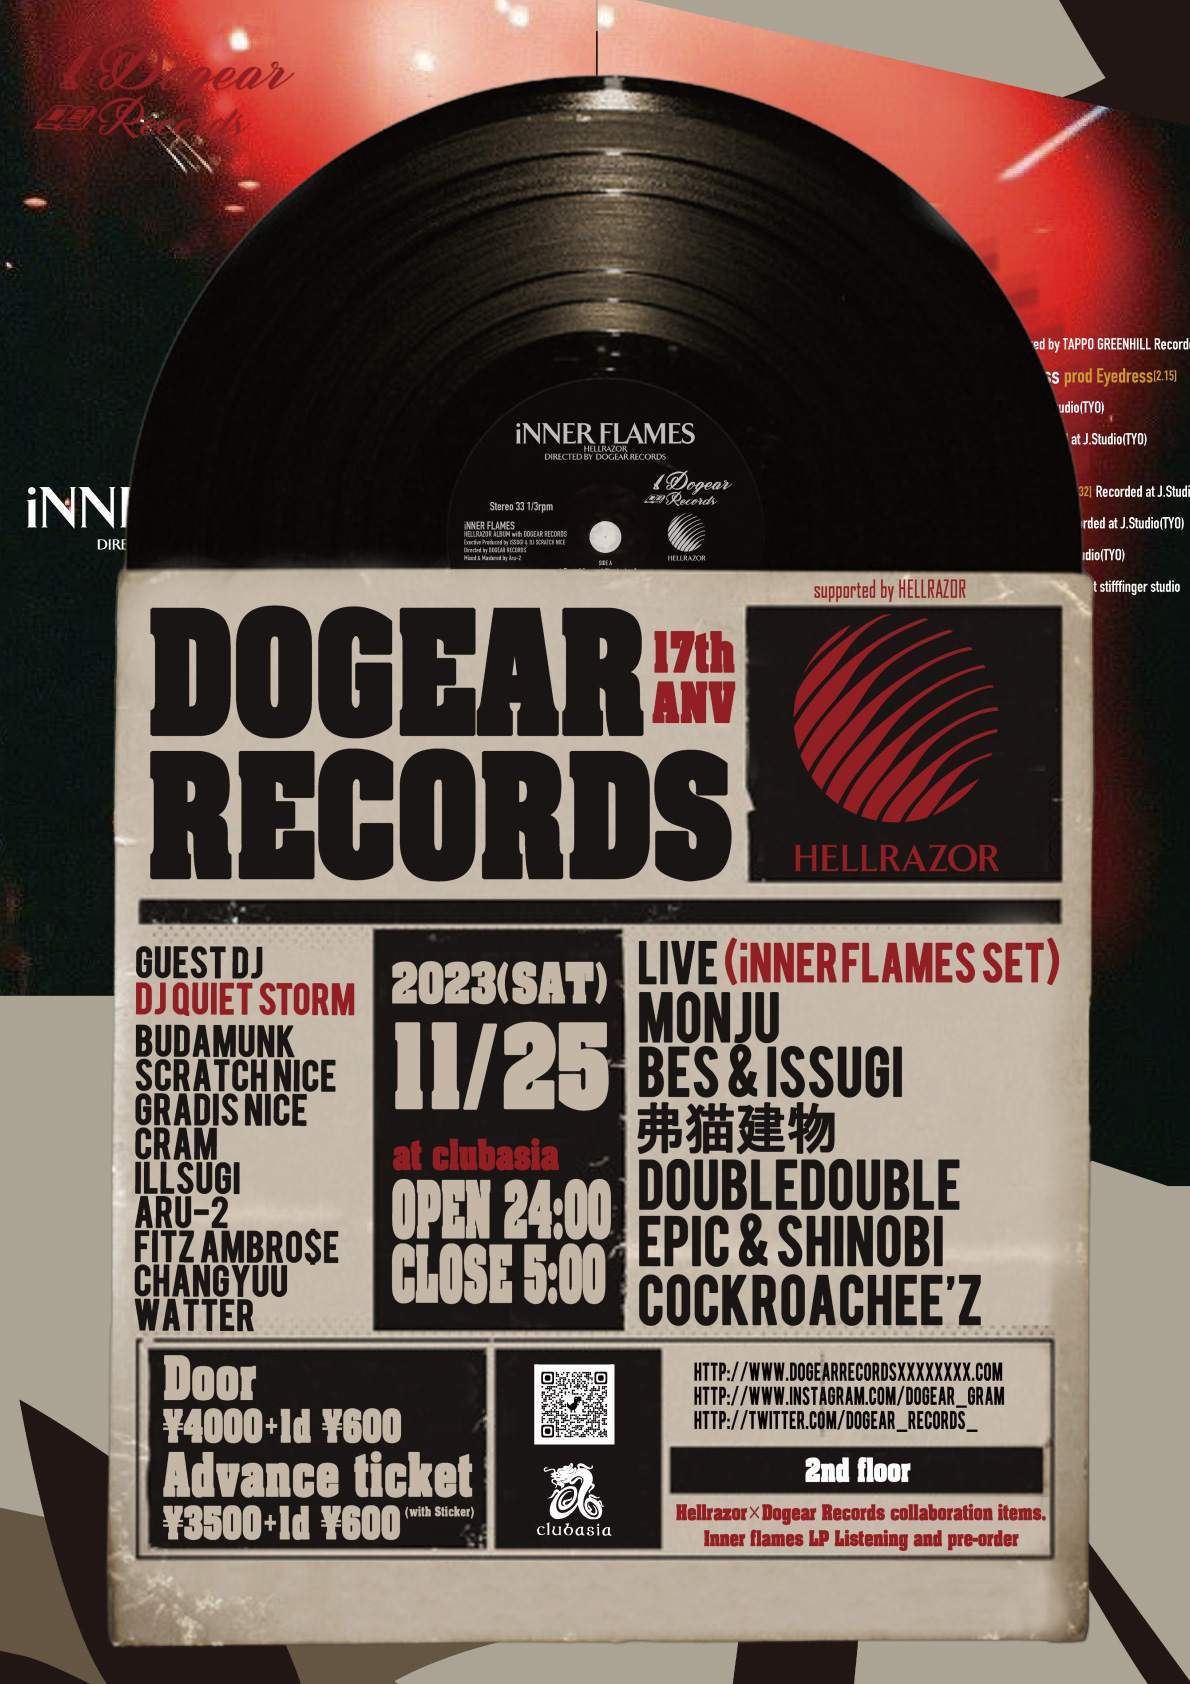 DOGEAR RECORDS 17th Anniversary Party supported by HELLRAZOR - フライヤー表